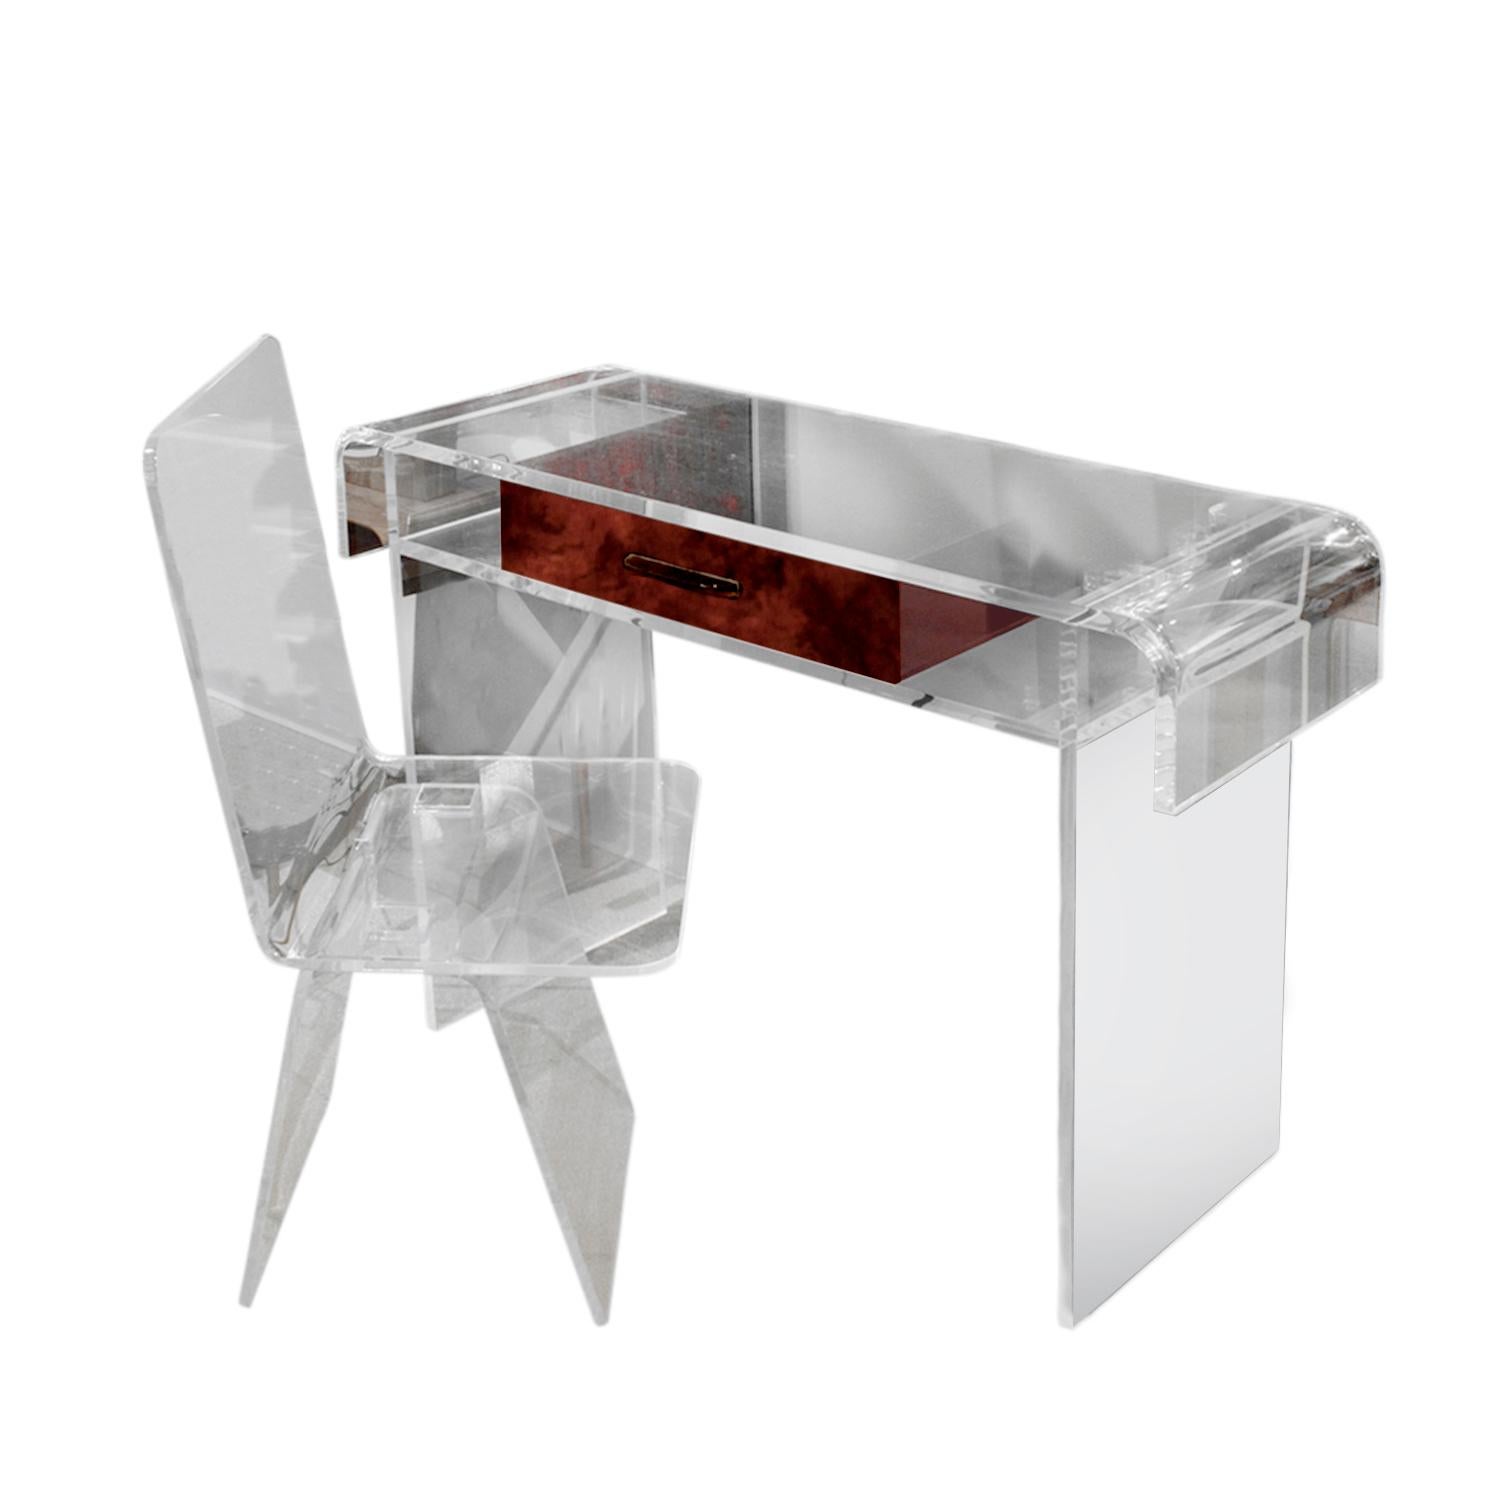 Custom Lucite Desk or Vanity with Tortishell Lucite Drawer and Chair, 1970s